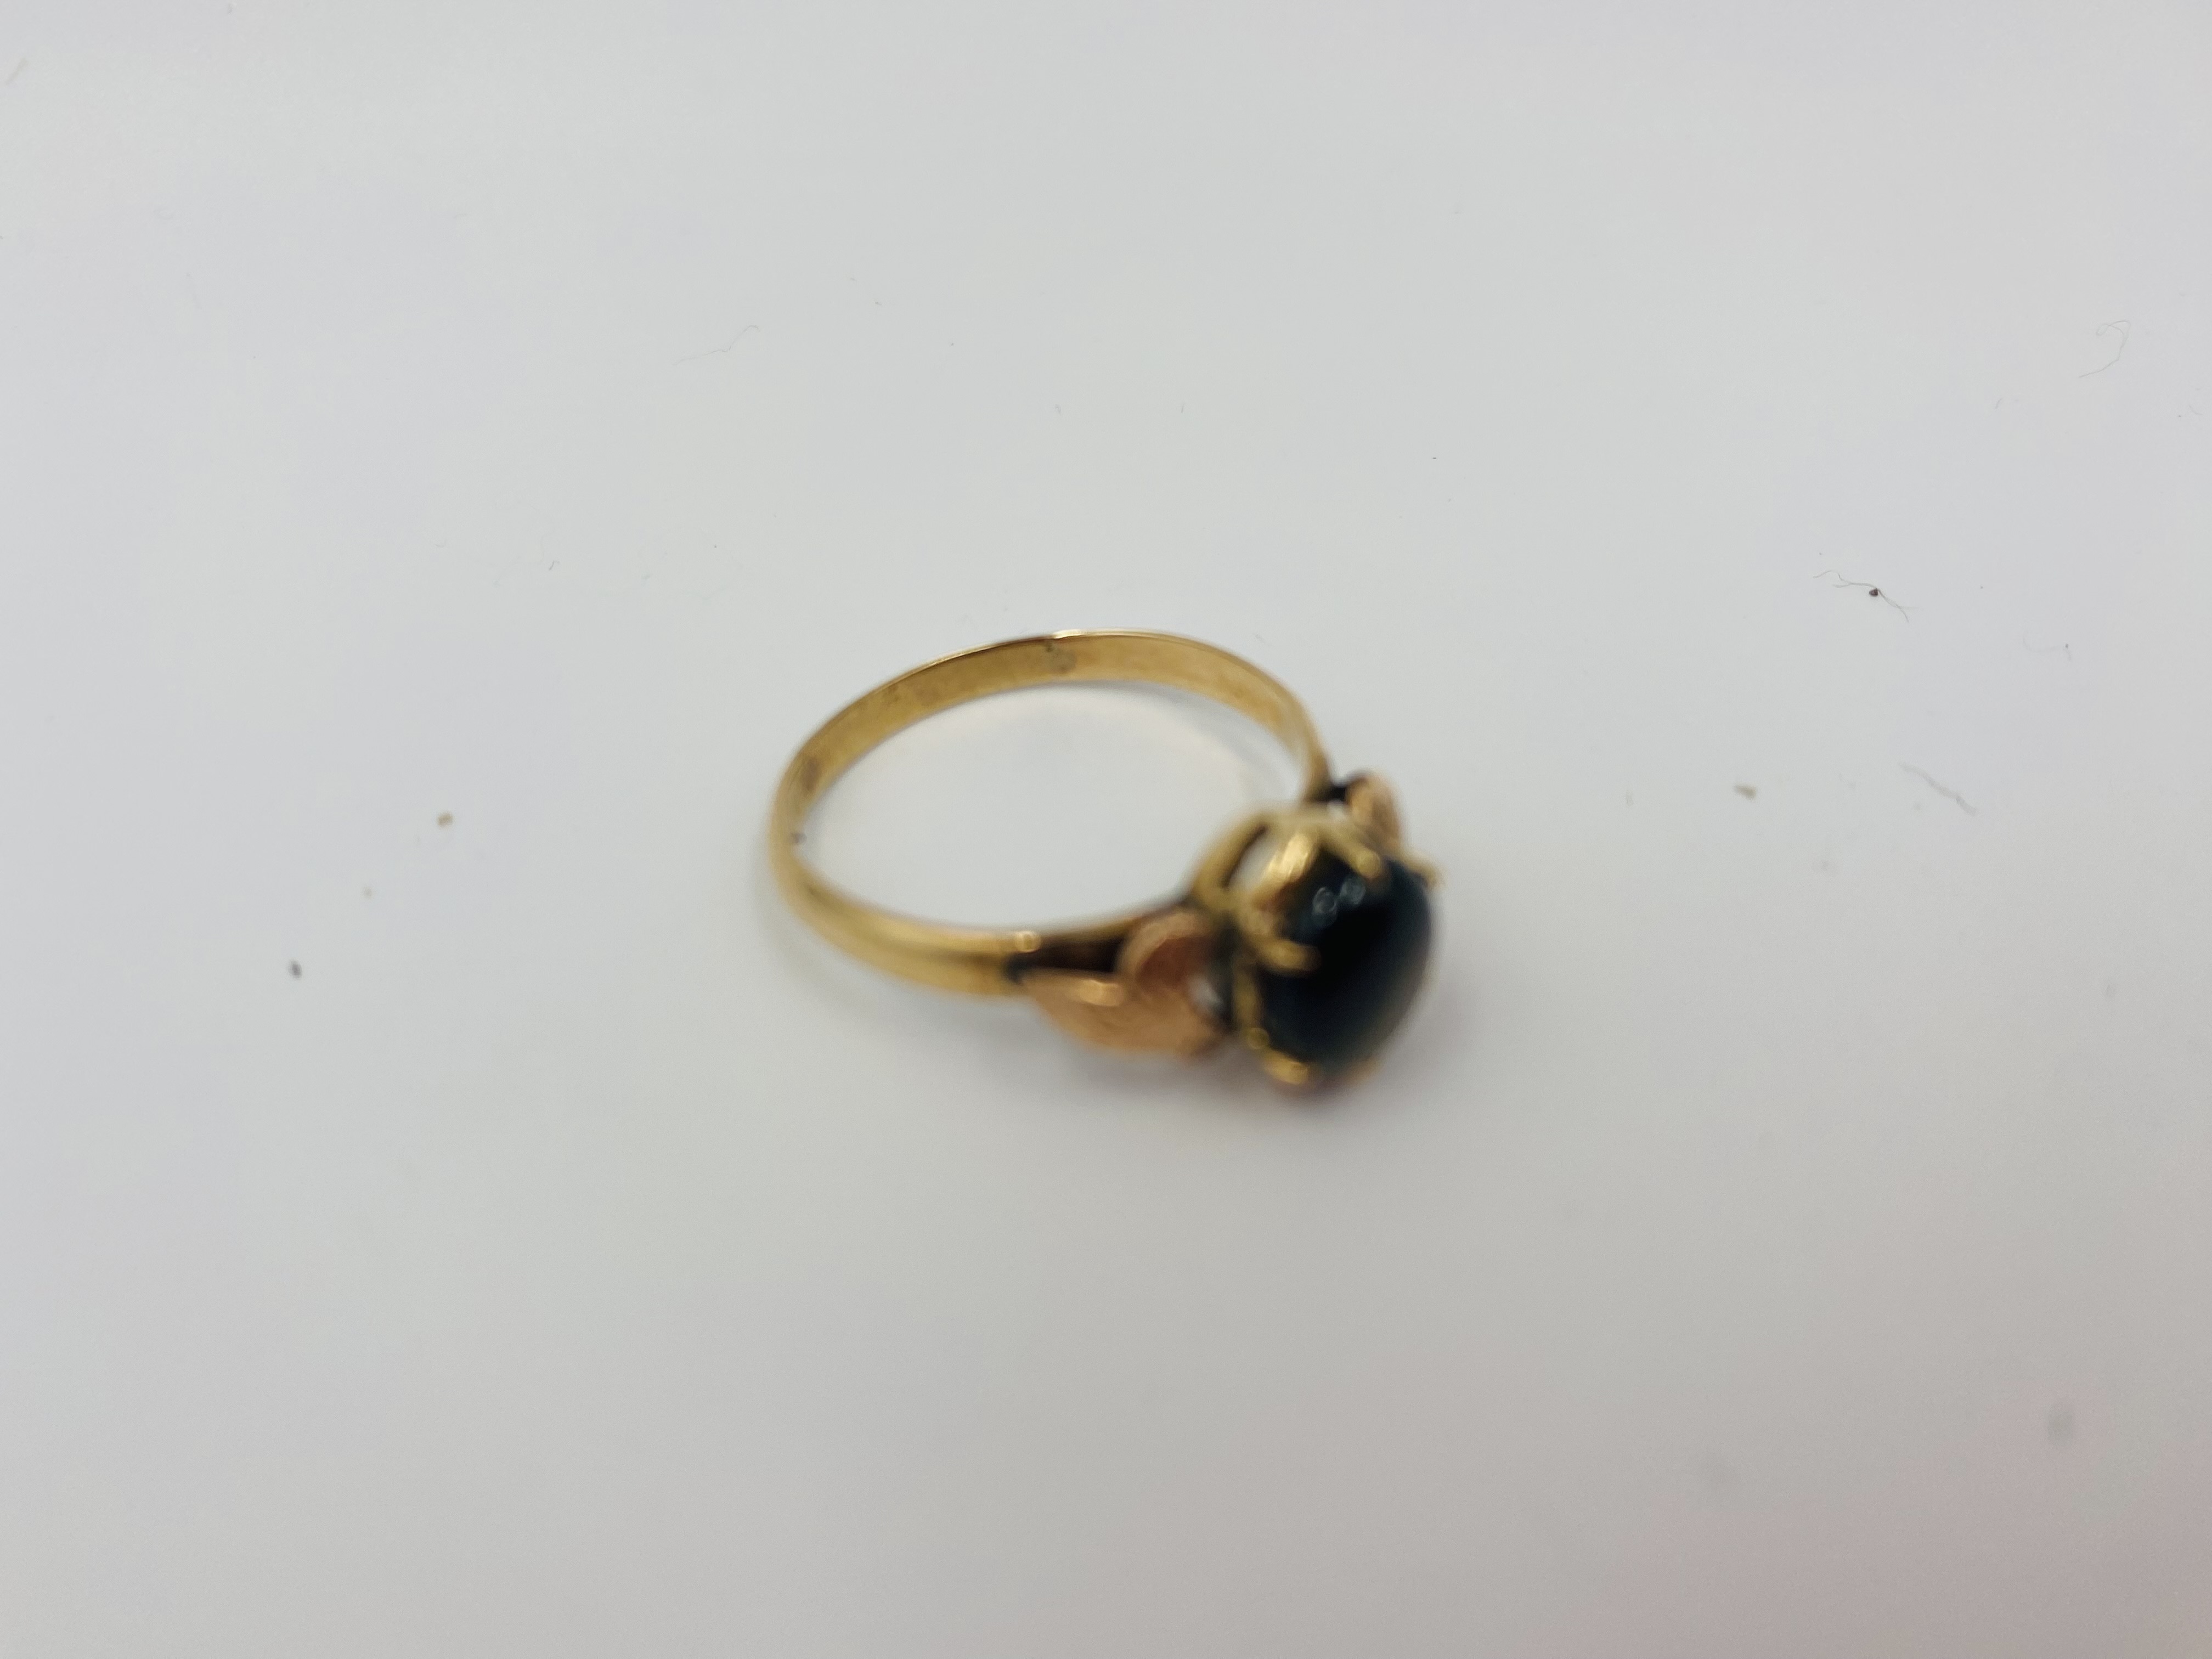 9ct gold ring set with a sapphire cabochon - Image 4 of 9